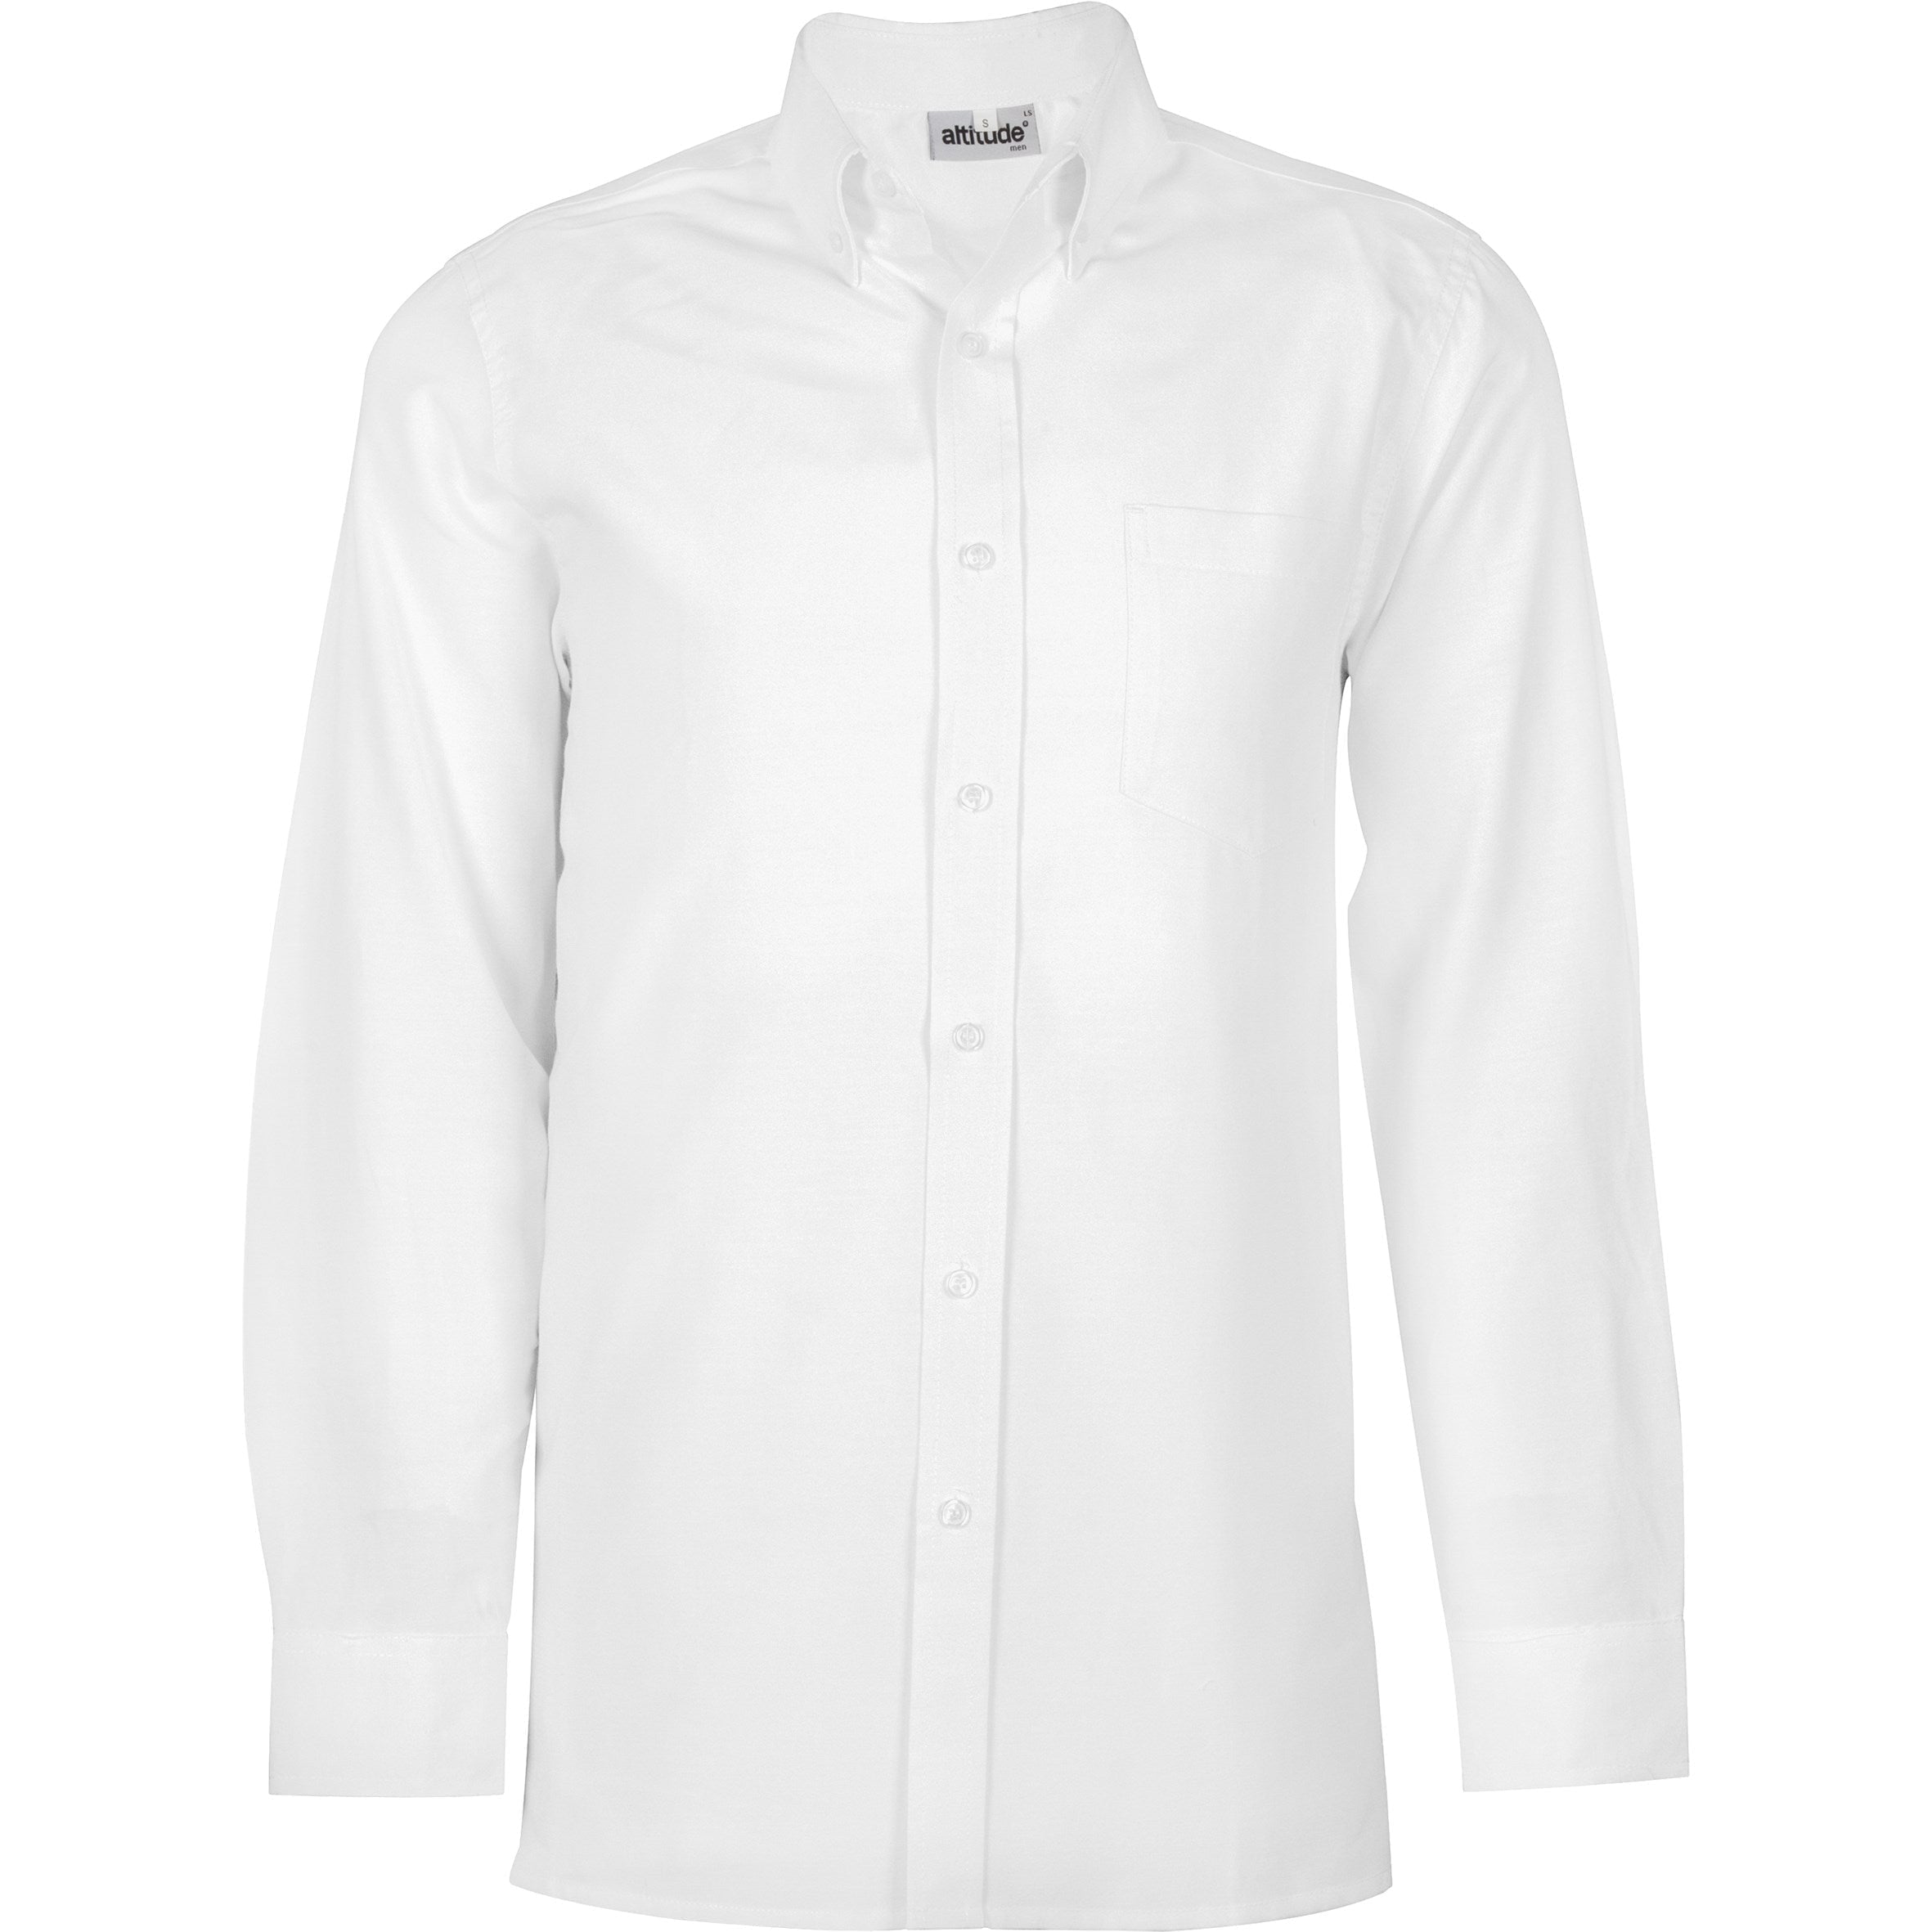 Mens Long Sleeve Oxford Shirt - White Only-